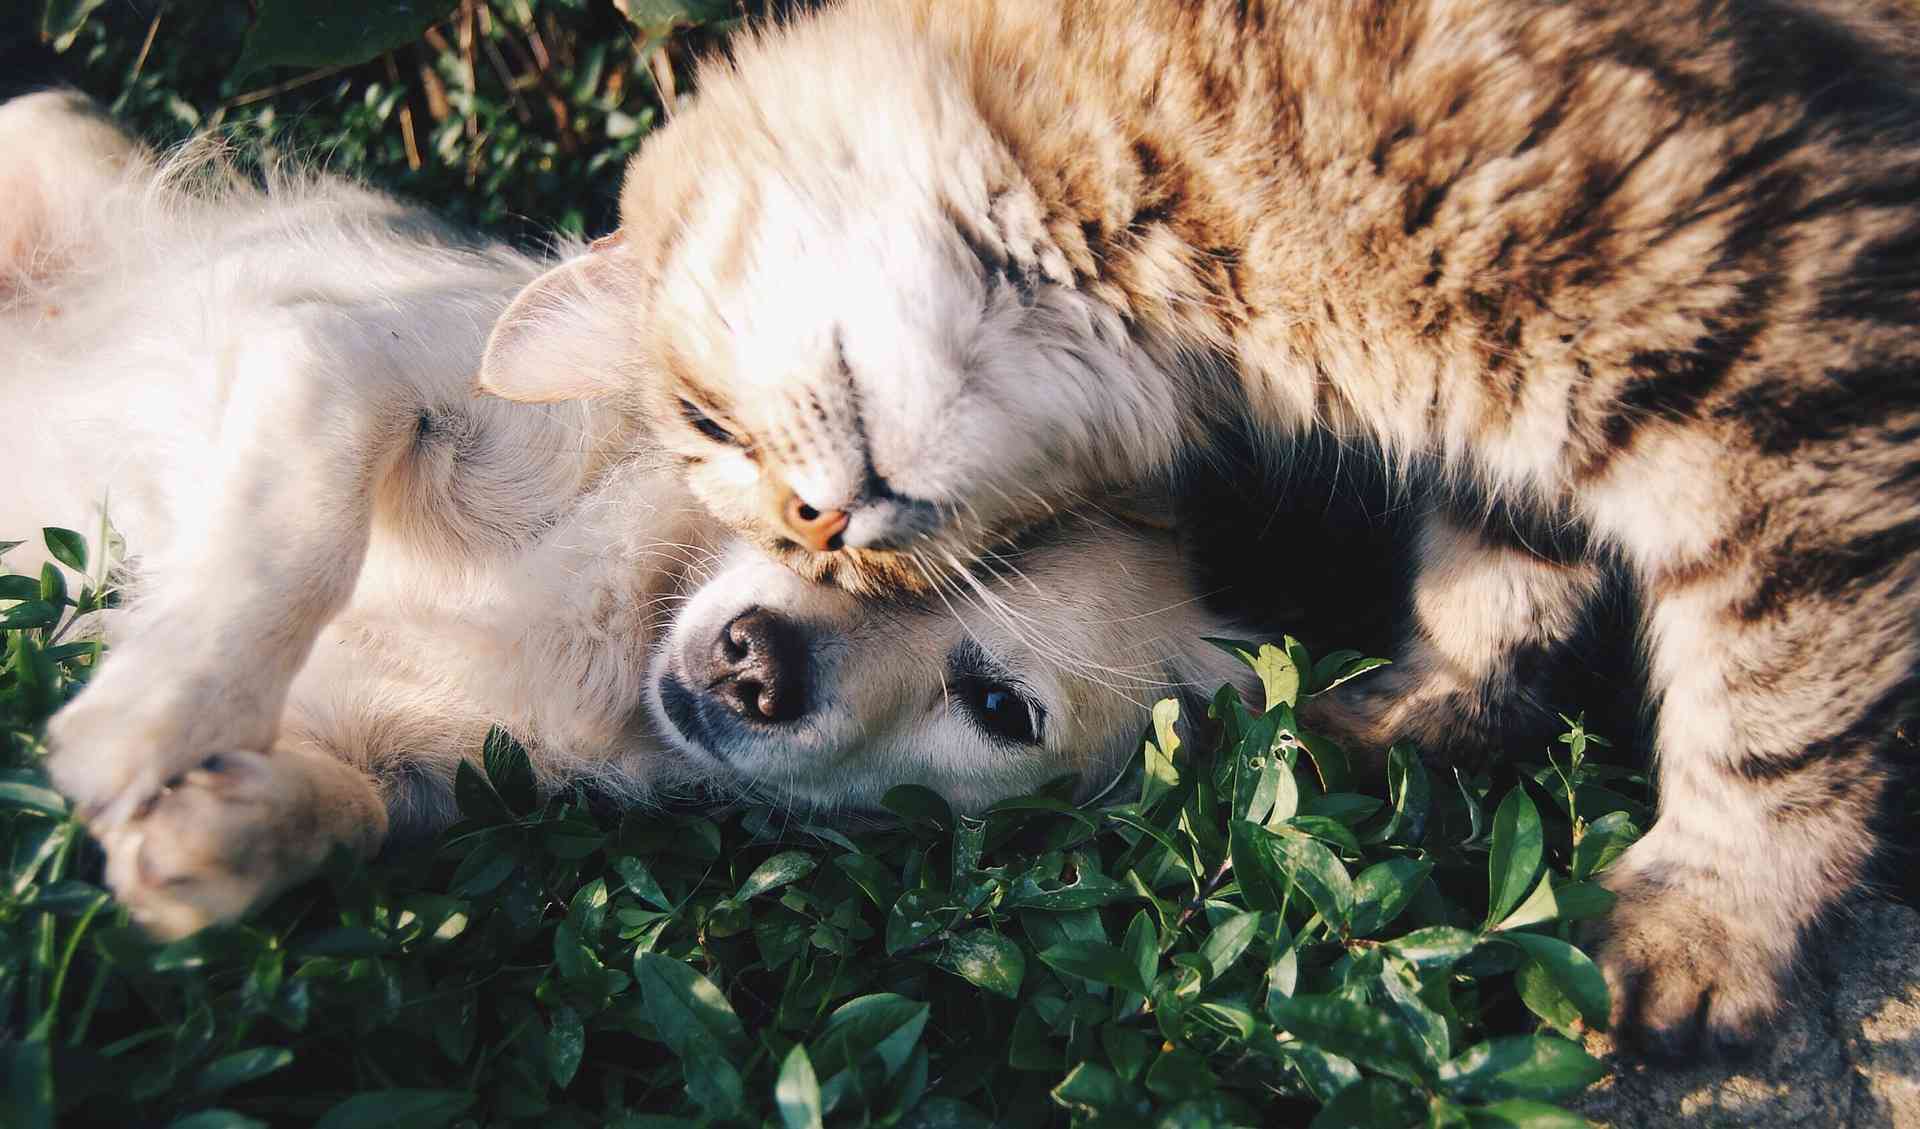 A puppy and kitten cuddling in the grass.